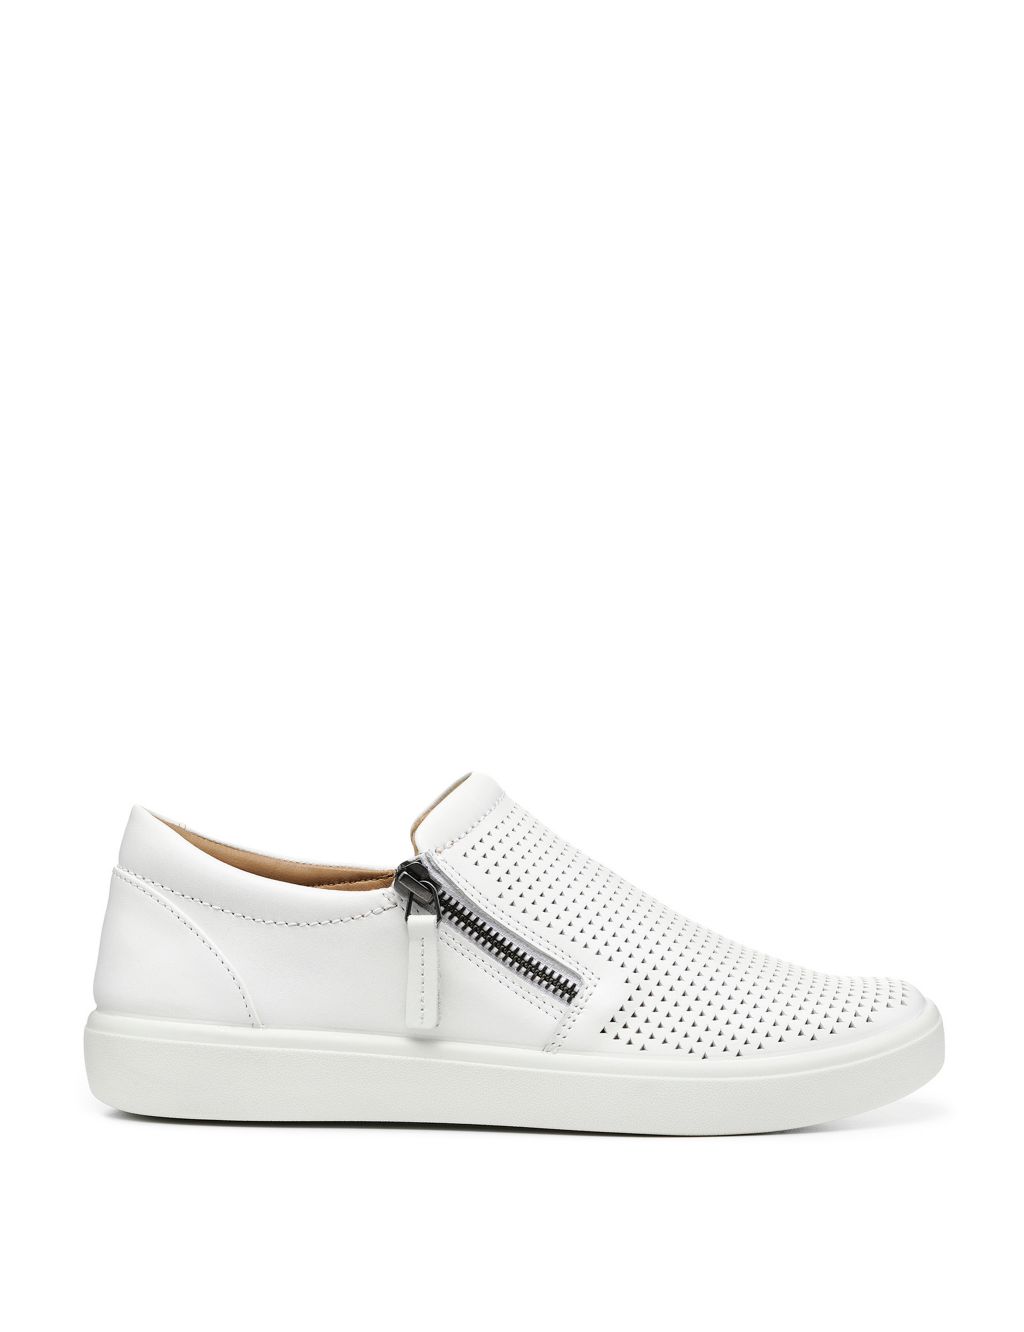 Daisy Wide Fit Leather Flat Boat Shoes